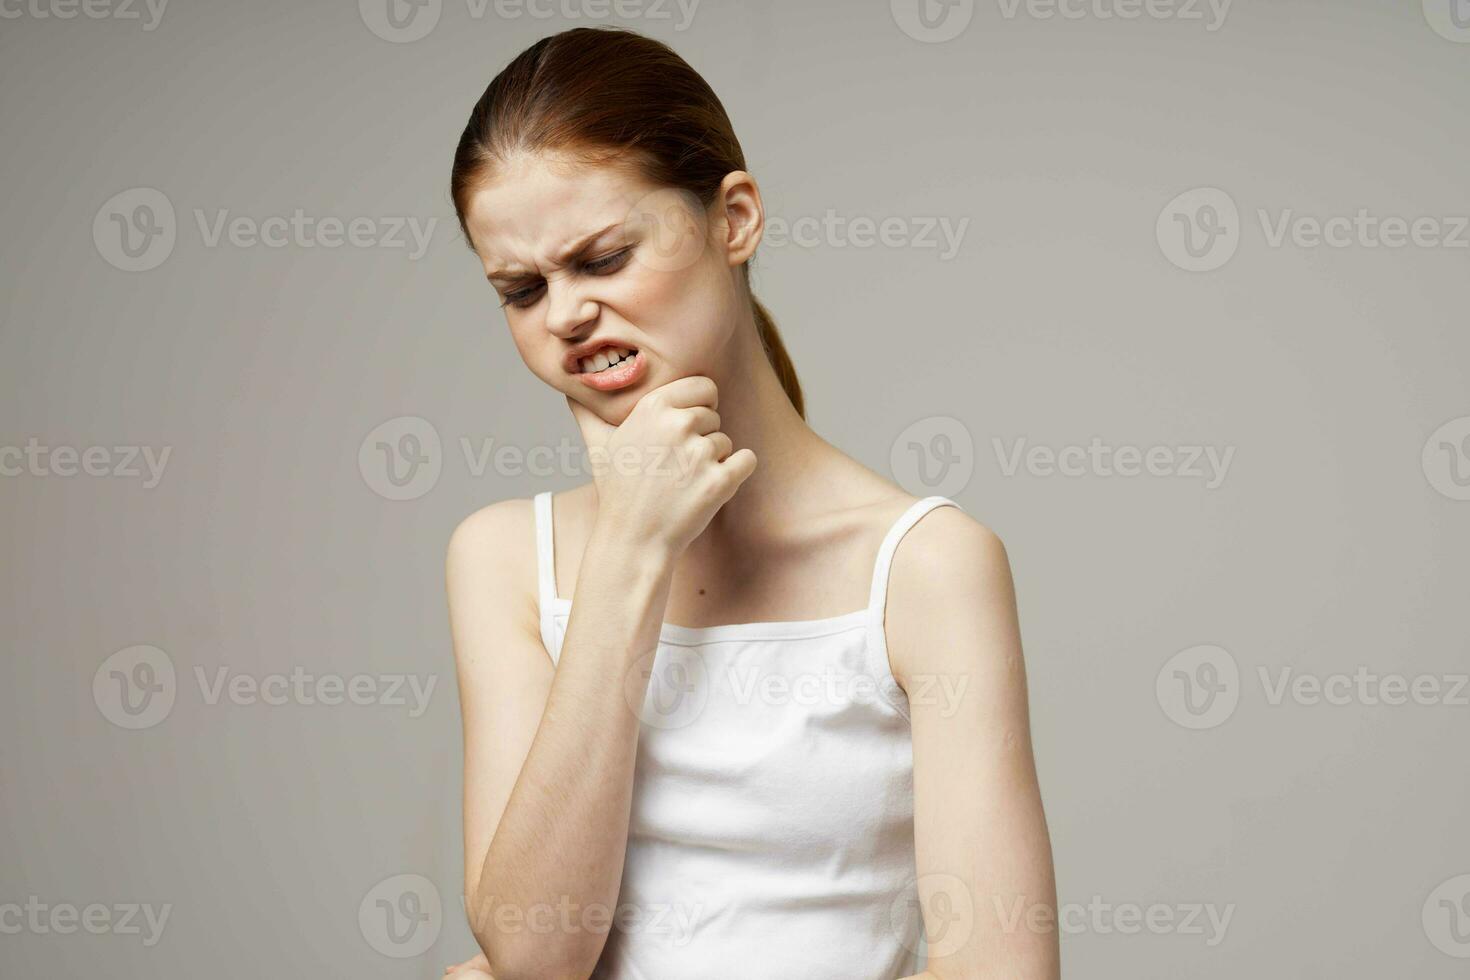 disgruntled woman dentistry dental pain close-up light background photo